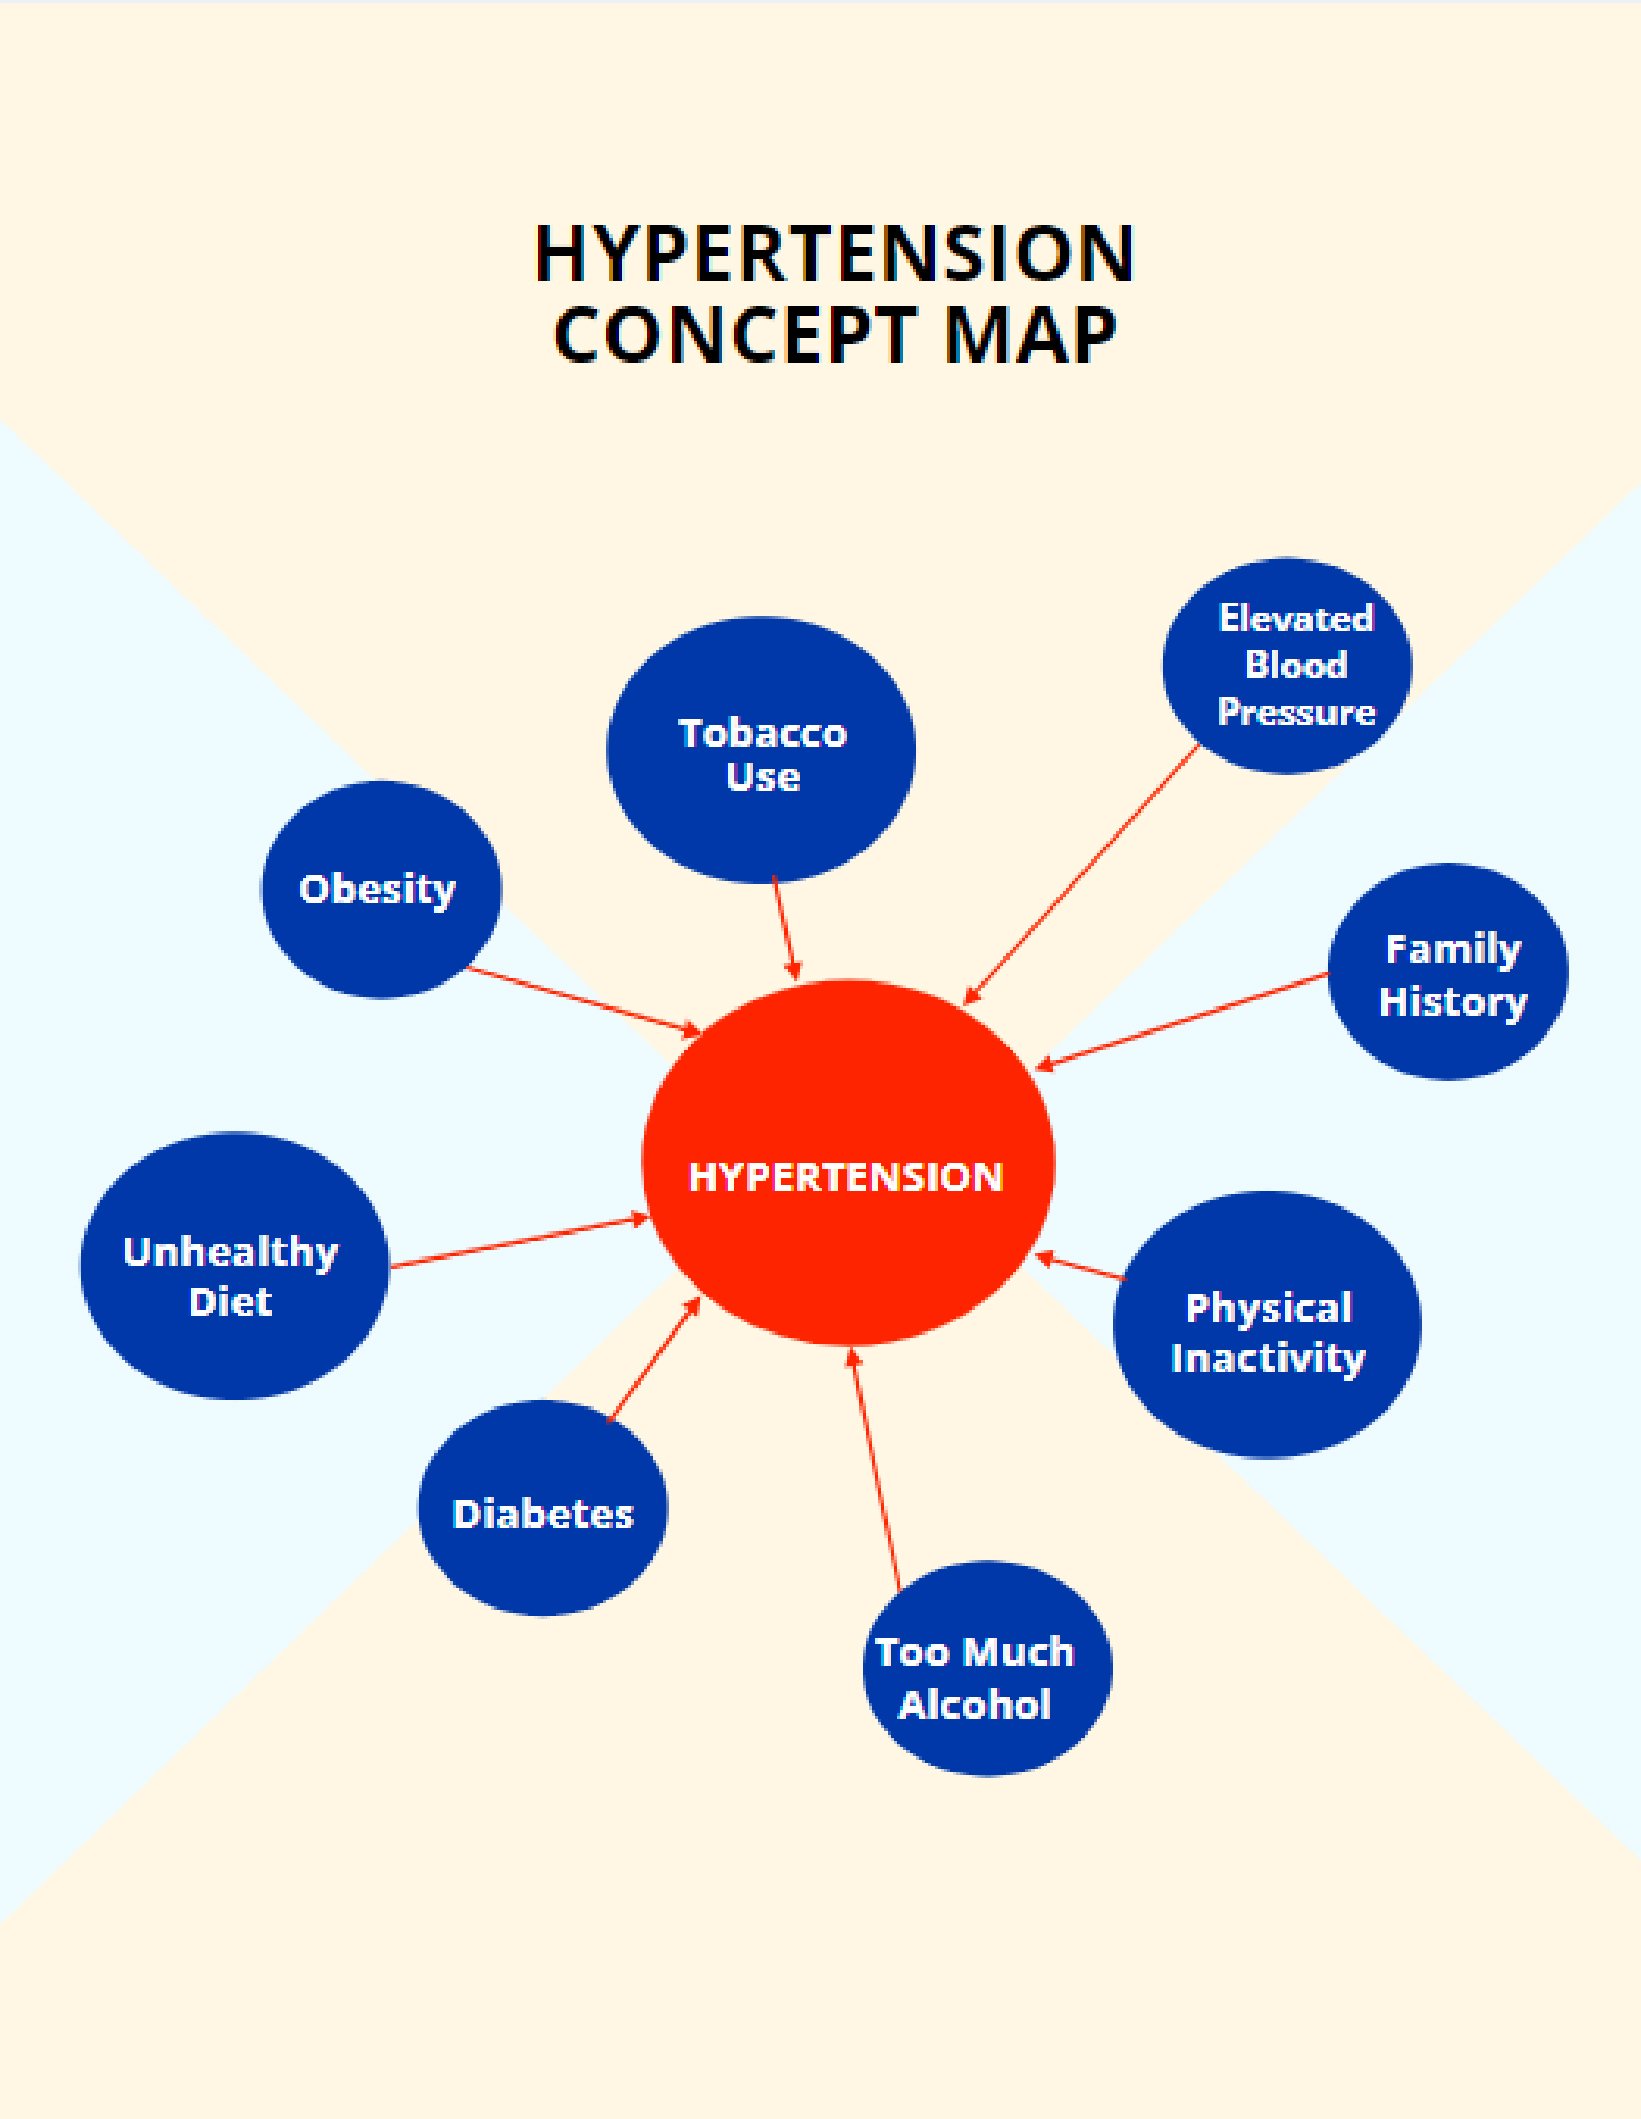 Free Hypertension Concept Map Template Download in Word, Google Docs